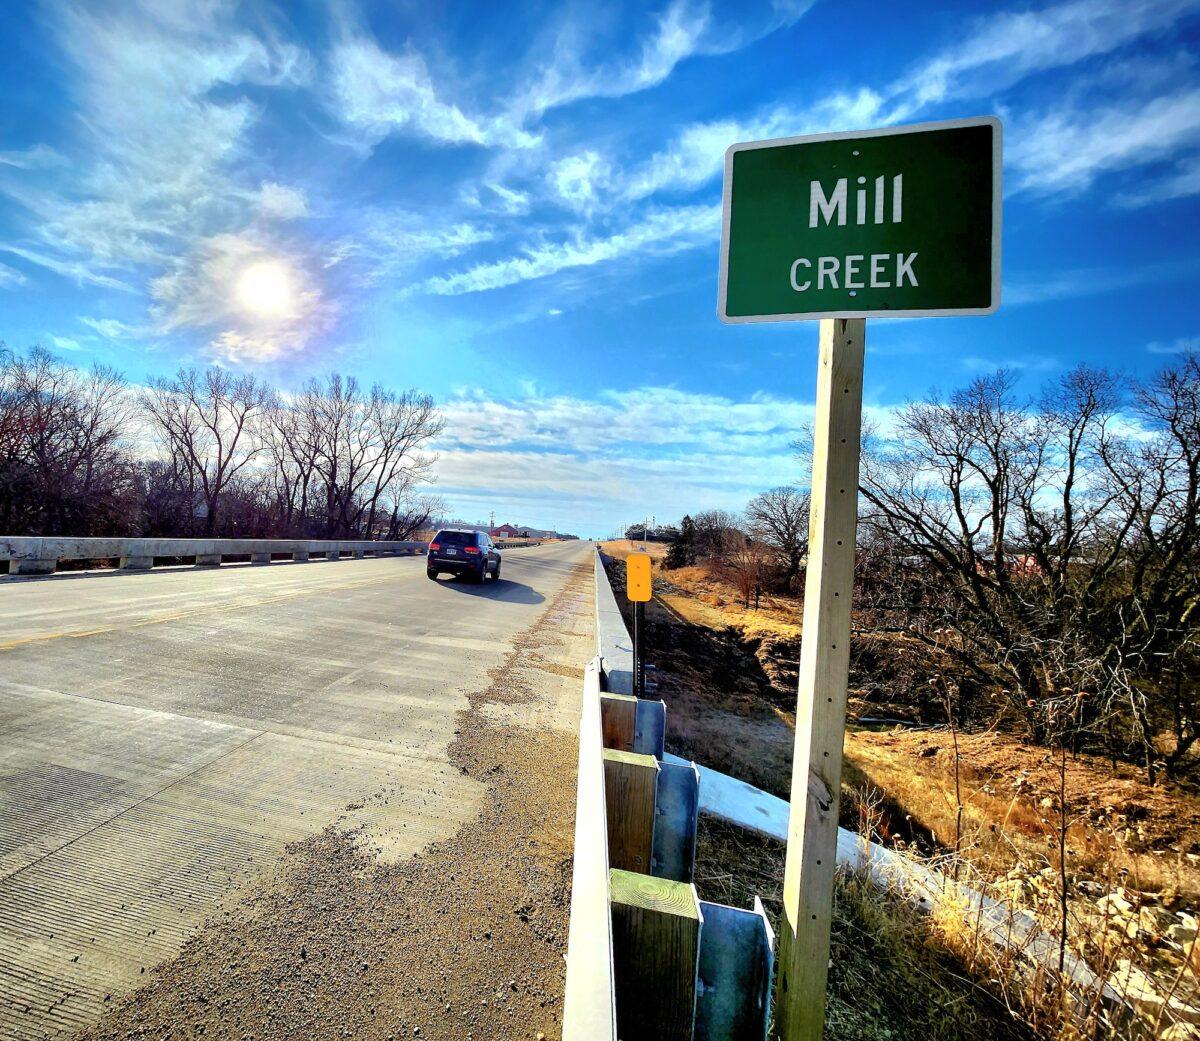 A sign marks a section of Mill Creek in Washington, Kansas, on Jan. 5, 2023. (Allan Stein/The Epoch Times)